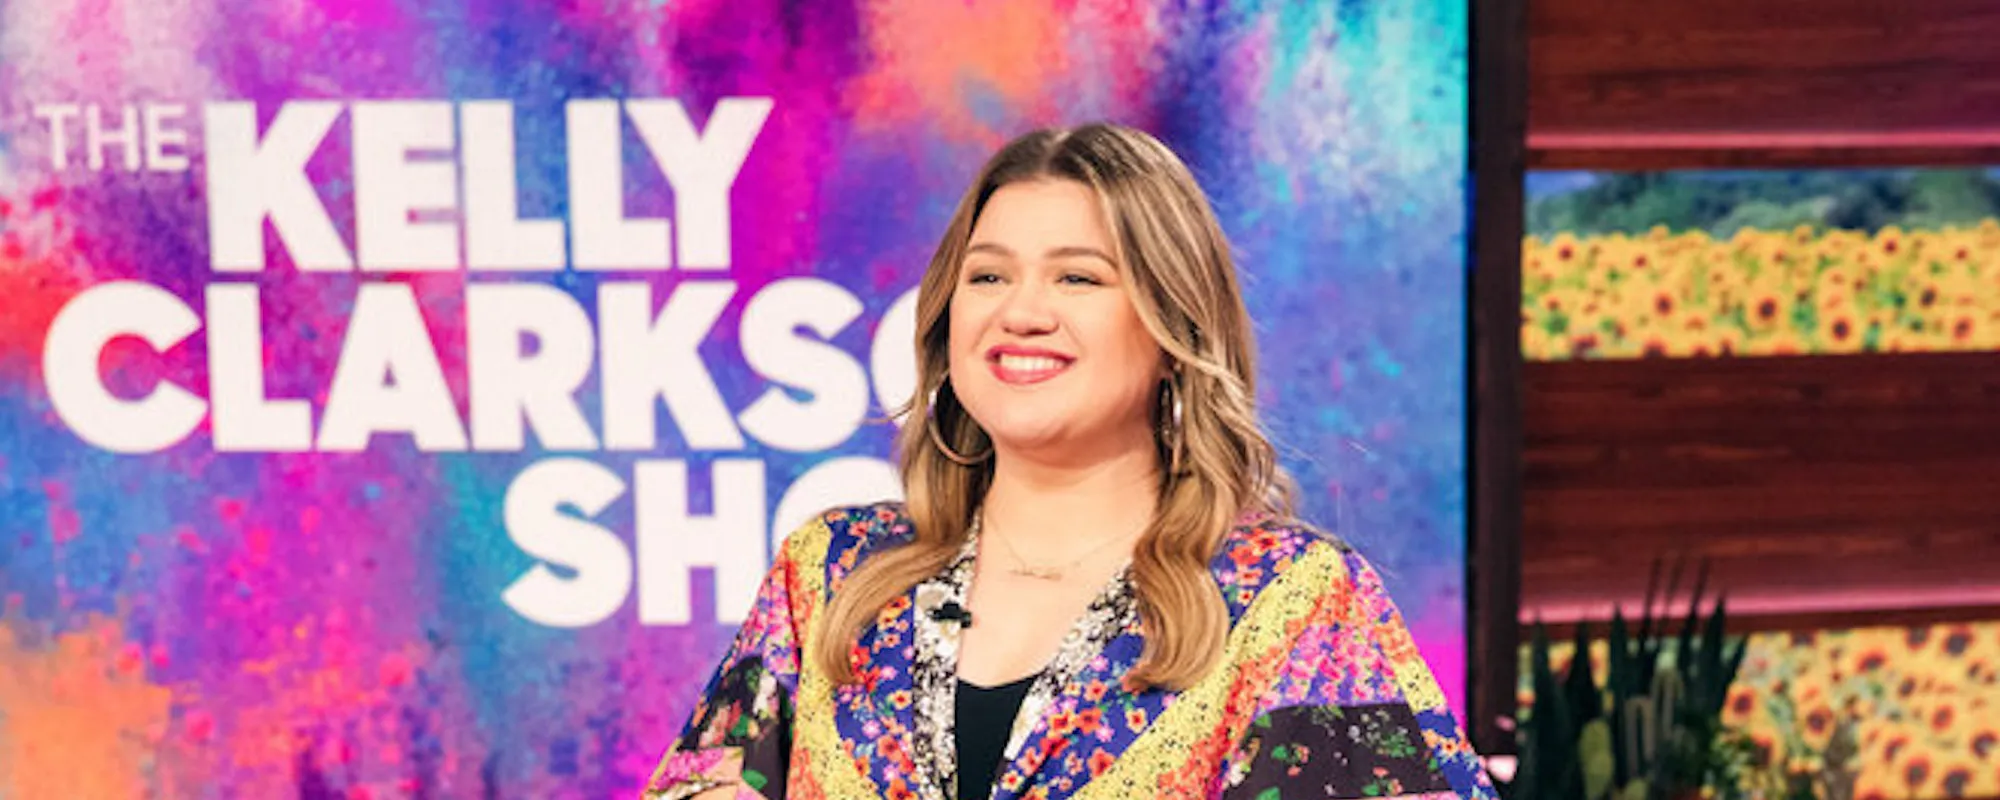 Kelly Clarkson Chats with Kelsea Ballerini, Covers Faith Hill, Destiny’s Child and More in Latest ‘Kellyoke’